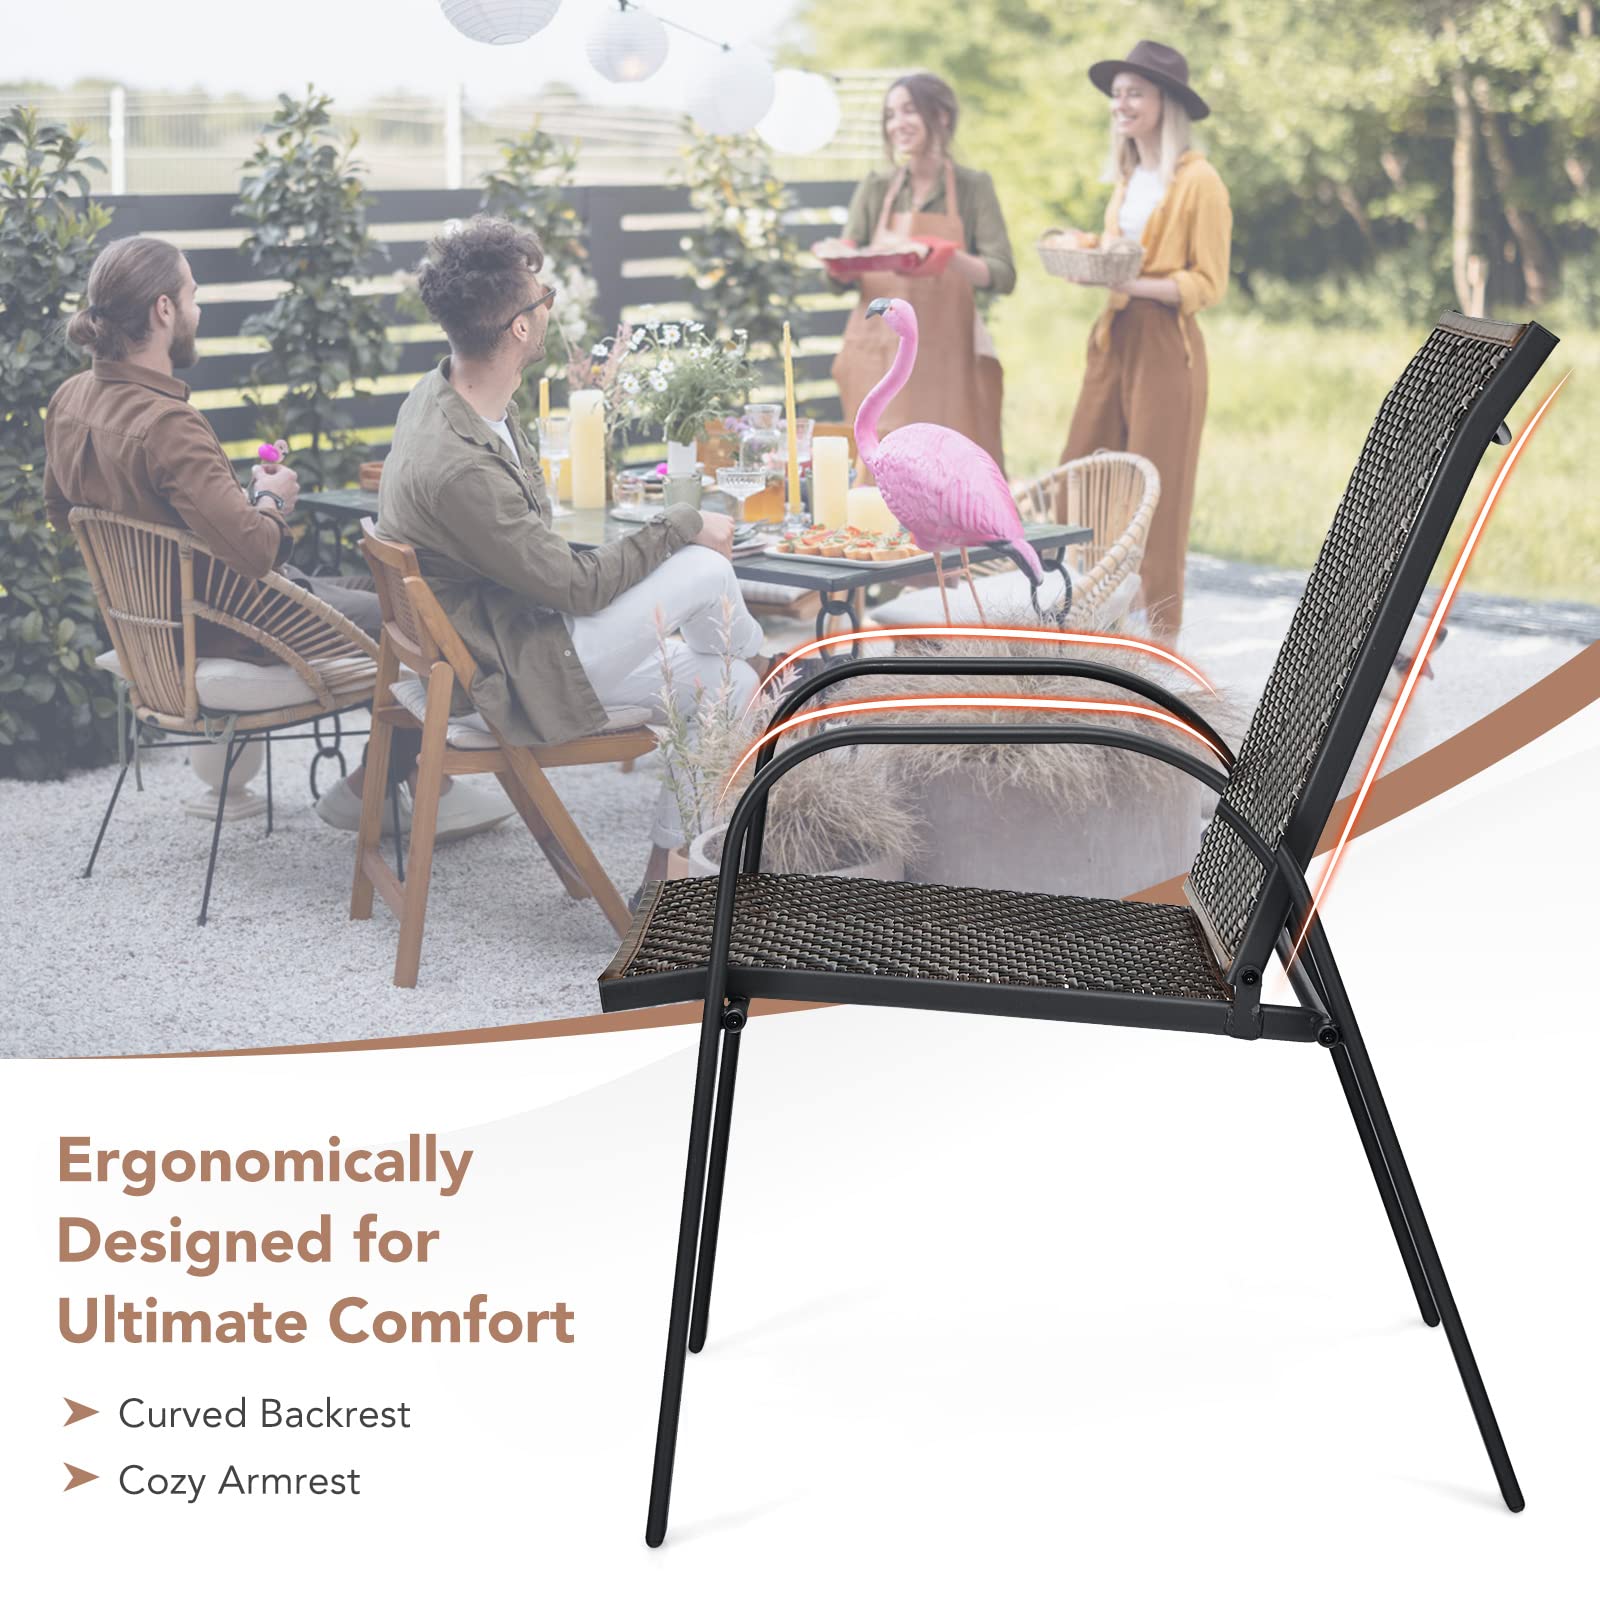 Tangkula Set of 6 Outdoor PE Wicker Stackable Chairs, Patio Dining Chairs with Sturdy Steel Frame, Outdoor Arm Chairs for Garden, Yard, Deck and Lawn (1, Mix Brown)